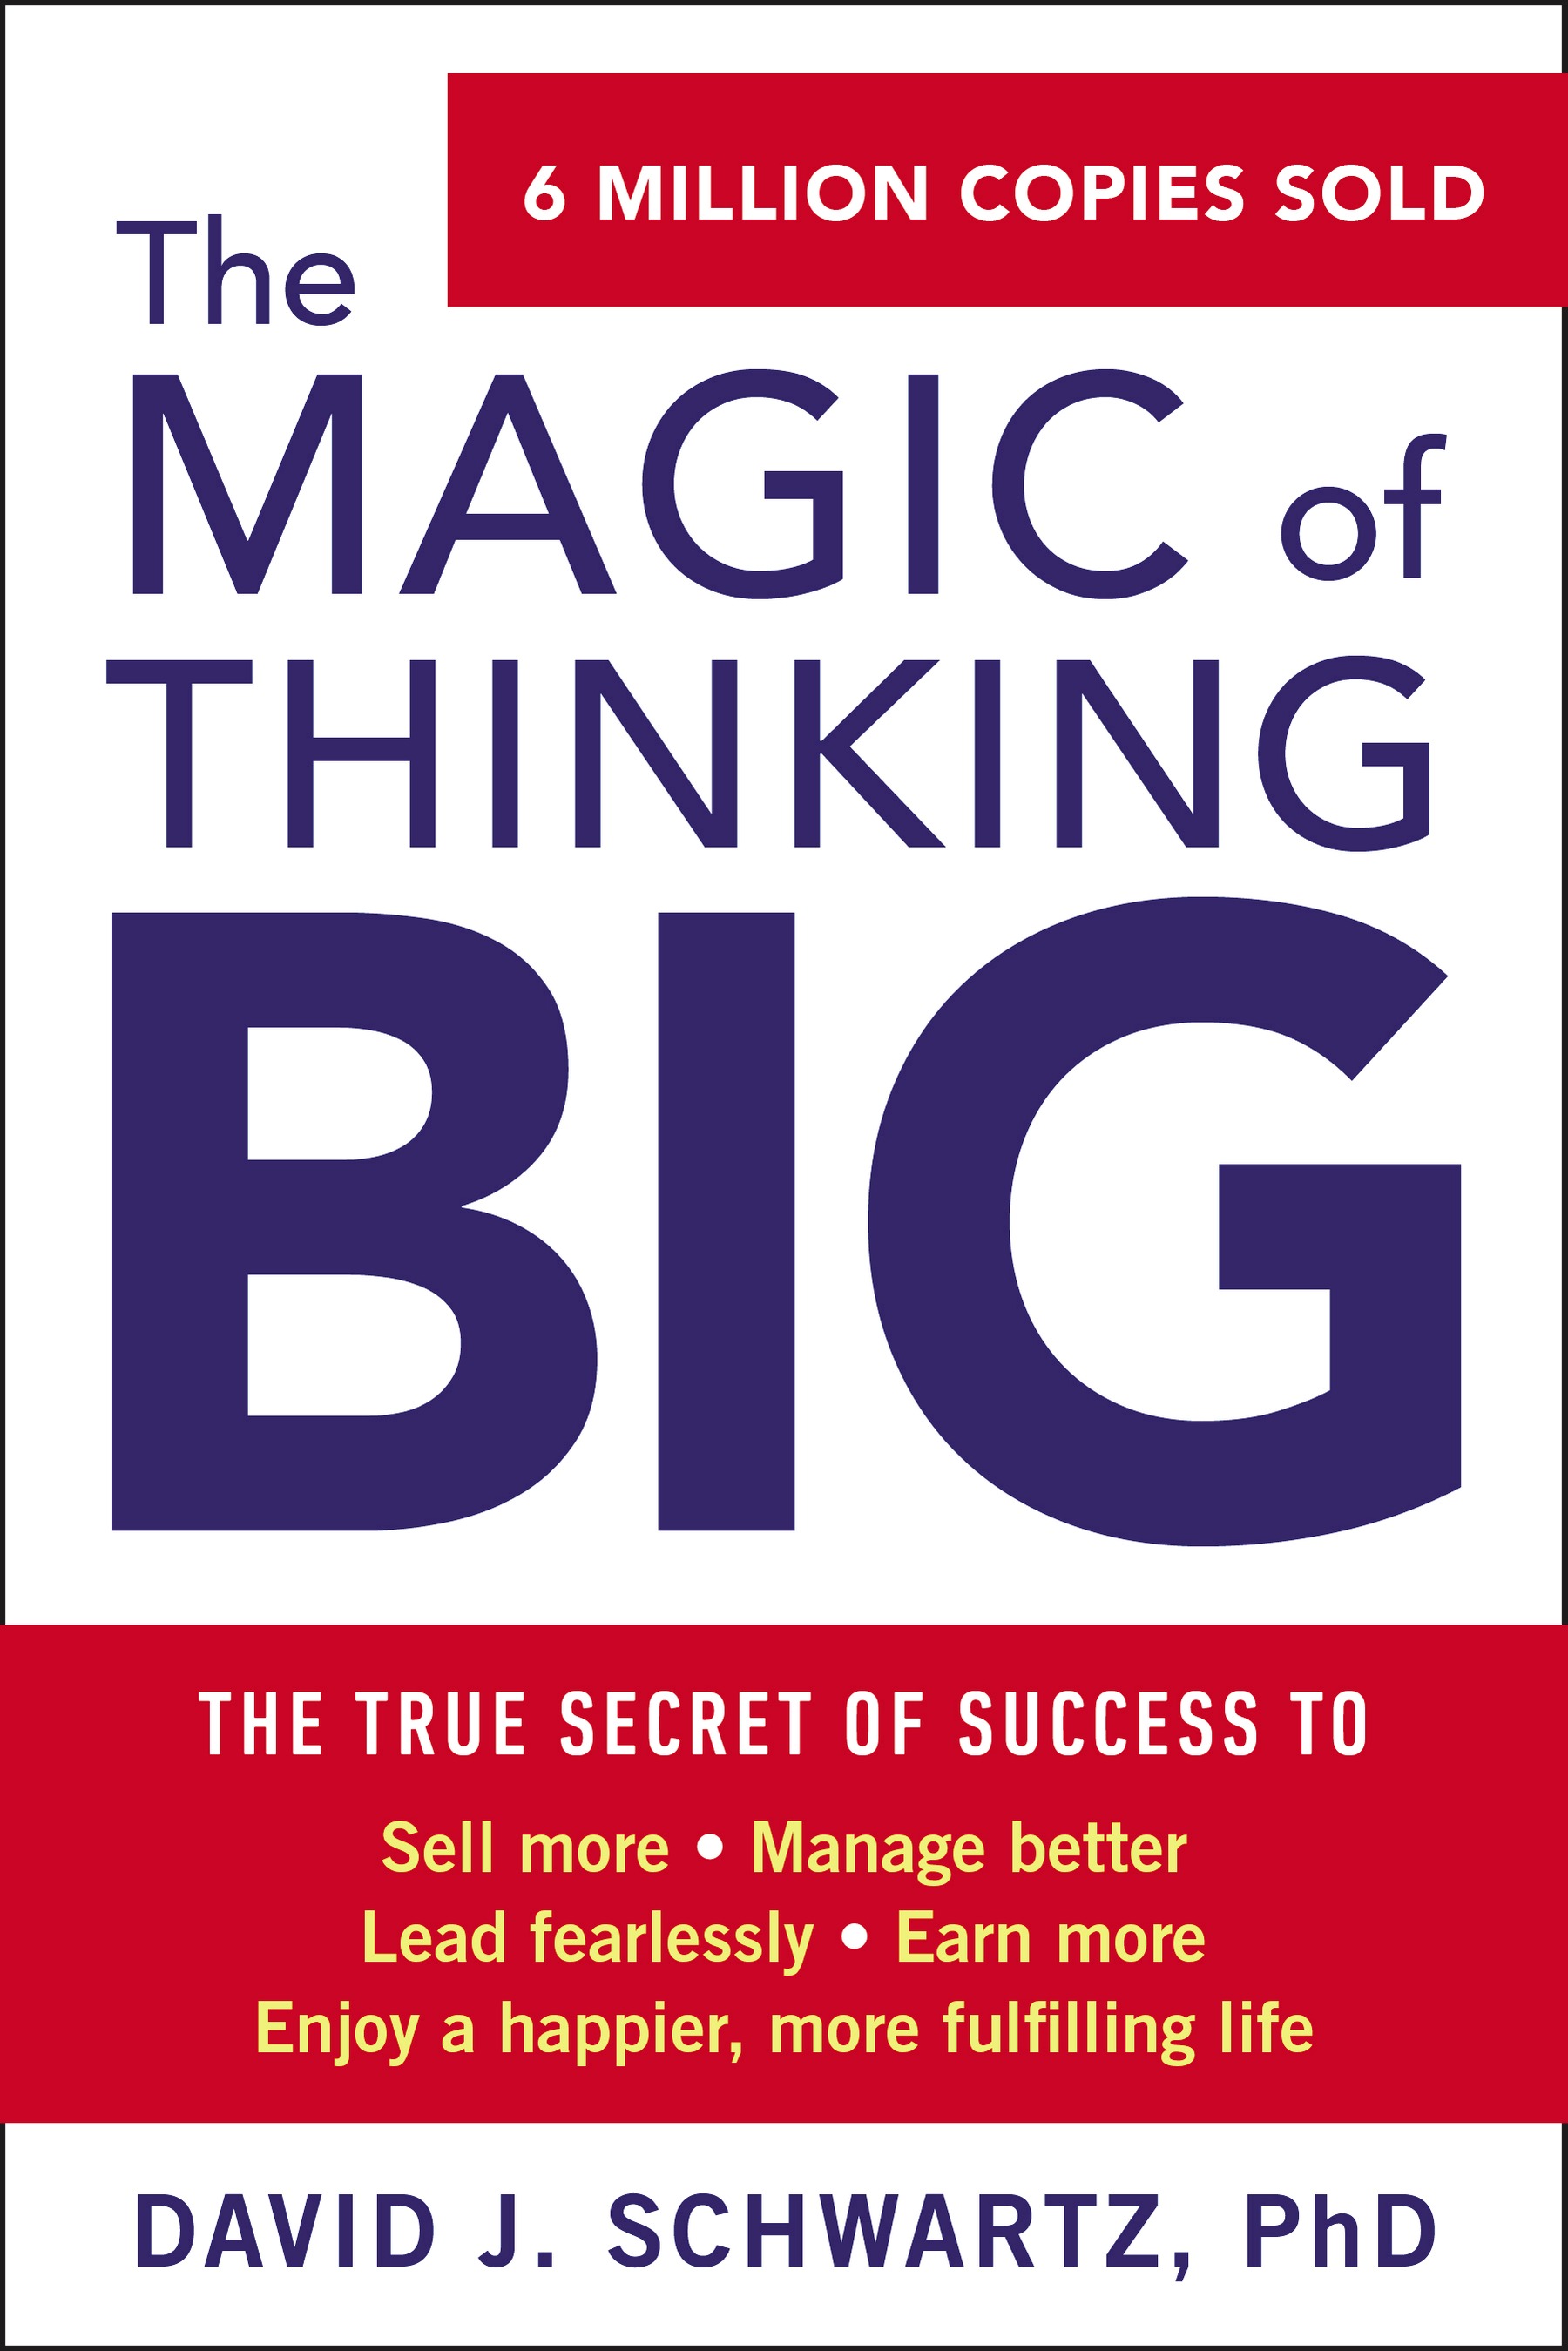 The magic of thinking big: 5 valuable lessons 6